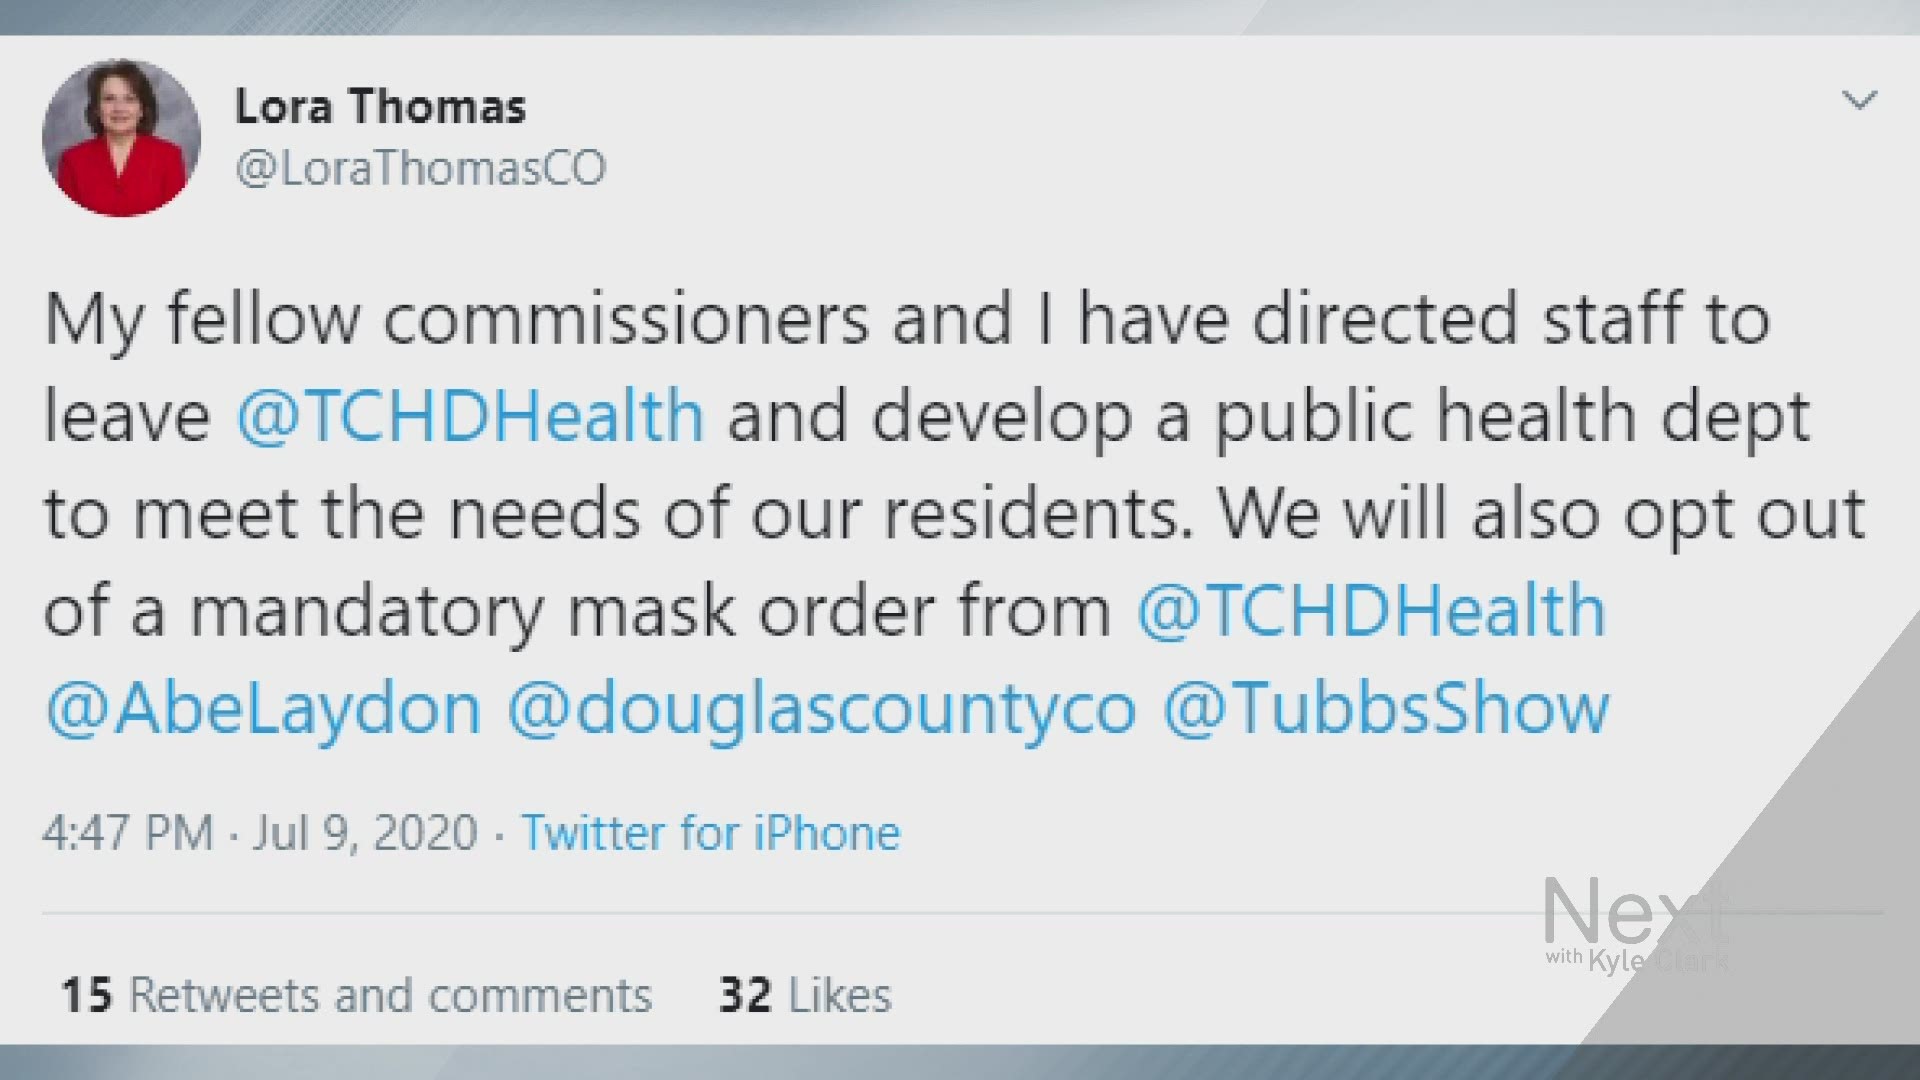 Commissioners said the mask mandate is not appropriate for people living in Douglas County due to low virus levels and high voluntarily compliance.